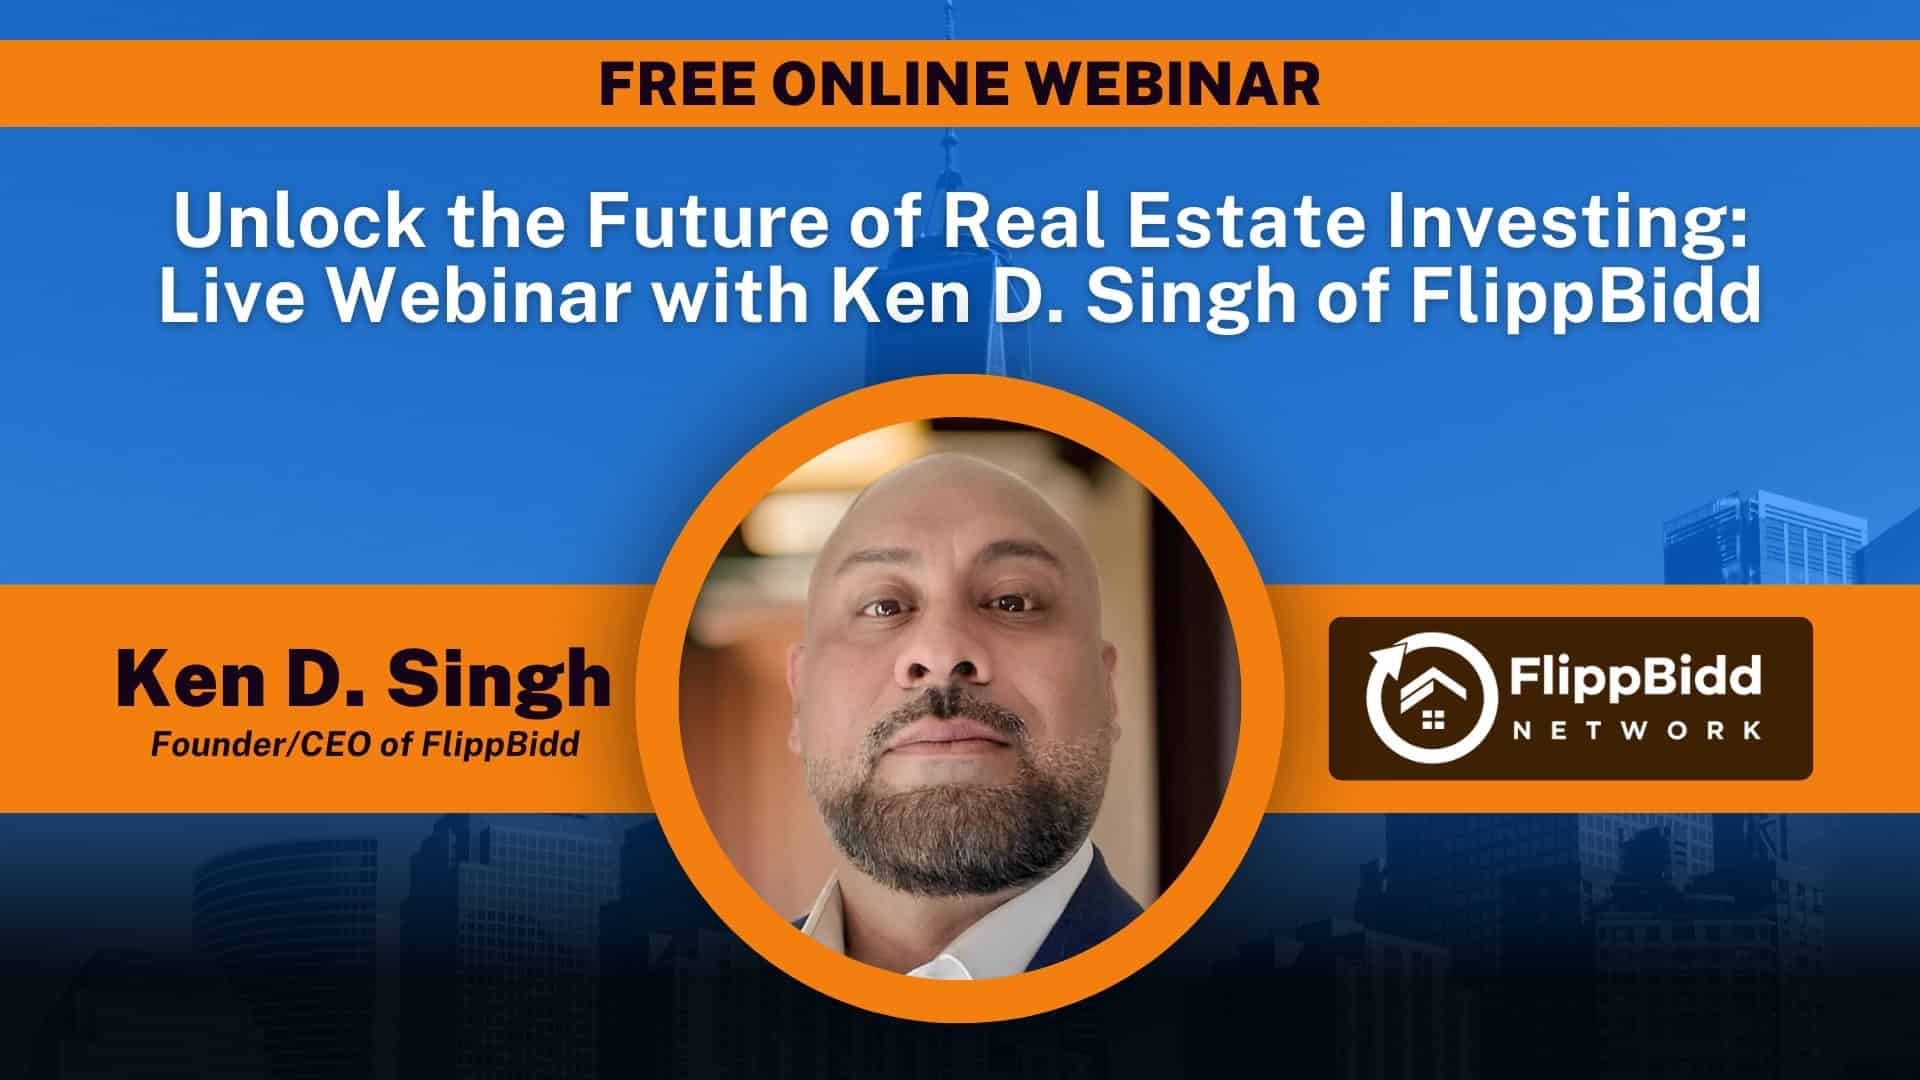 Unlock the Future of Real Estate Investing: Live Webinar with Ken D. Singh of FlippBidd (LIVE DEMO) - It's time to create a TRUE real estate investing community.